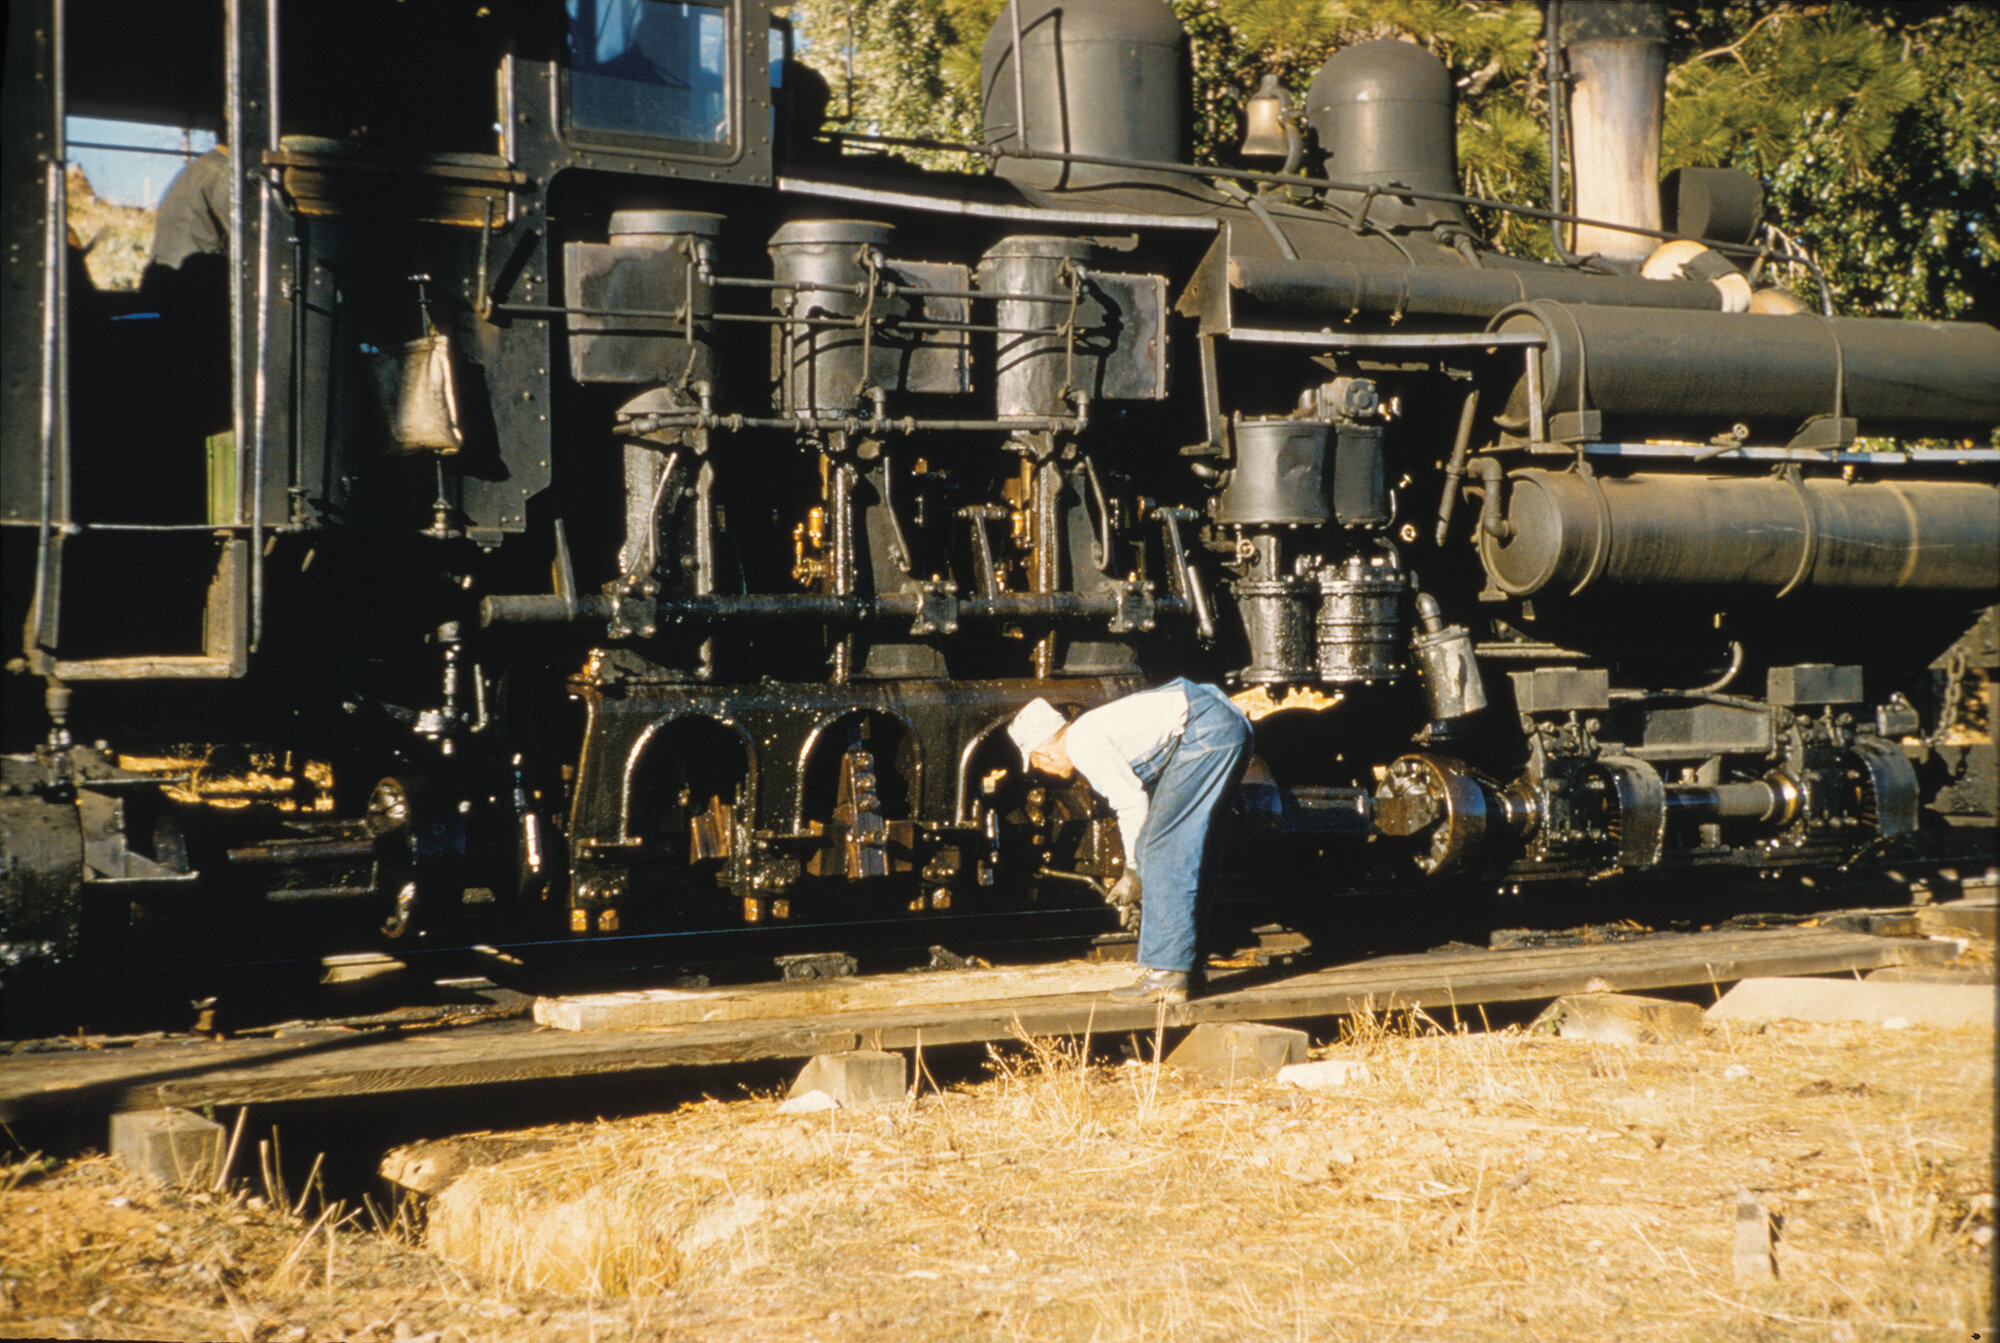  Gears in the Woods: 7 Different Steam Logging Operations in the  American West : Movies & TV